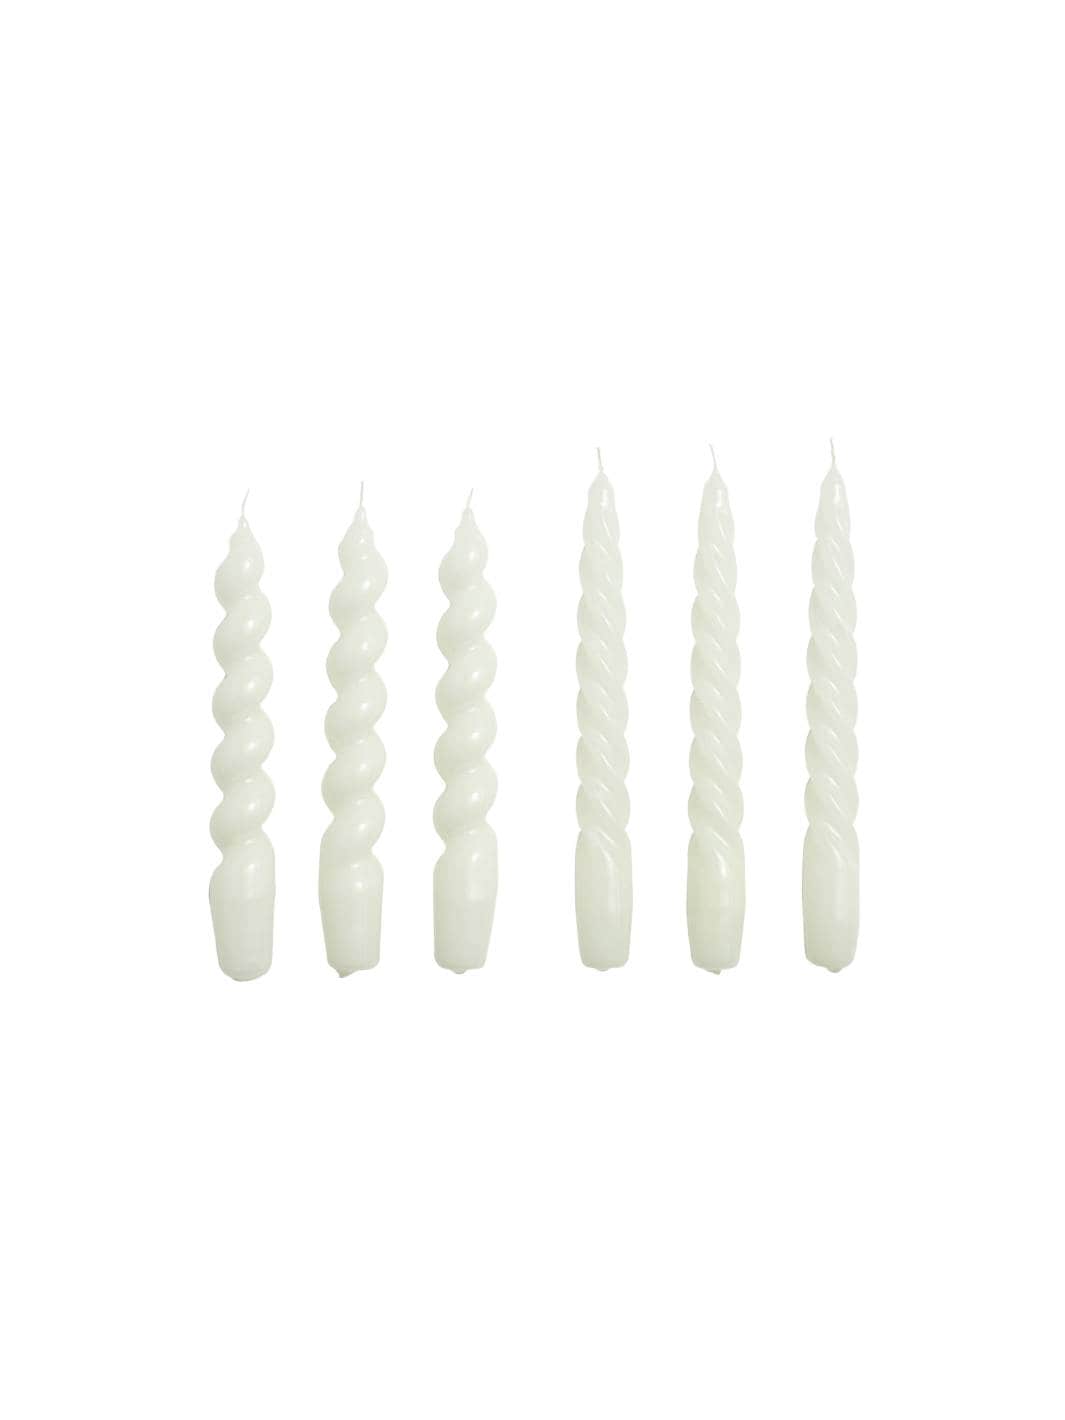 Hay Lys & Lysestaker Lys | Candle - Small Mix Set of 6 Off White